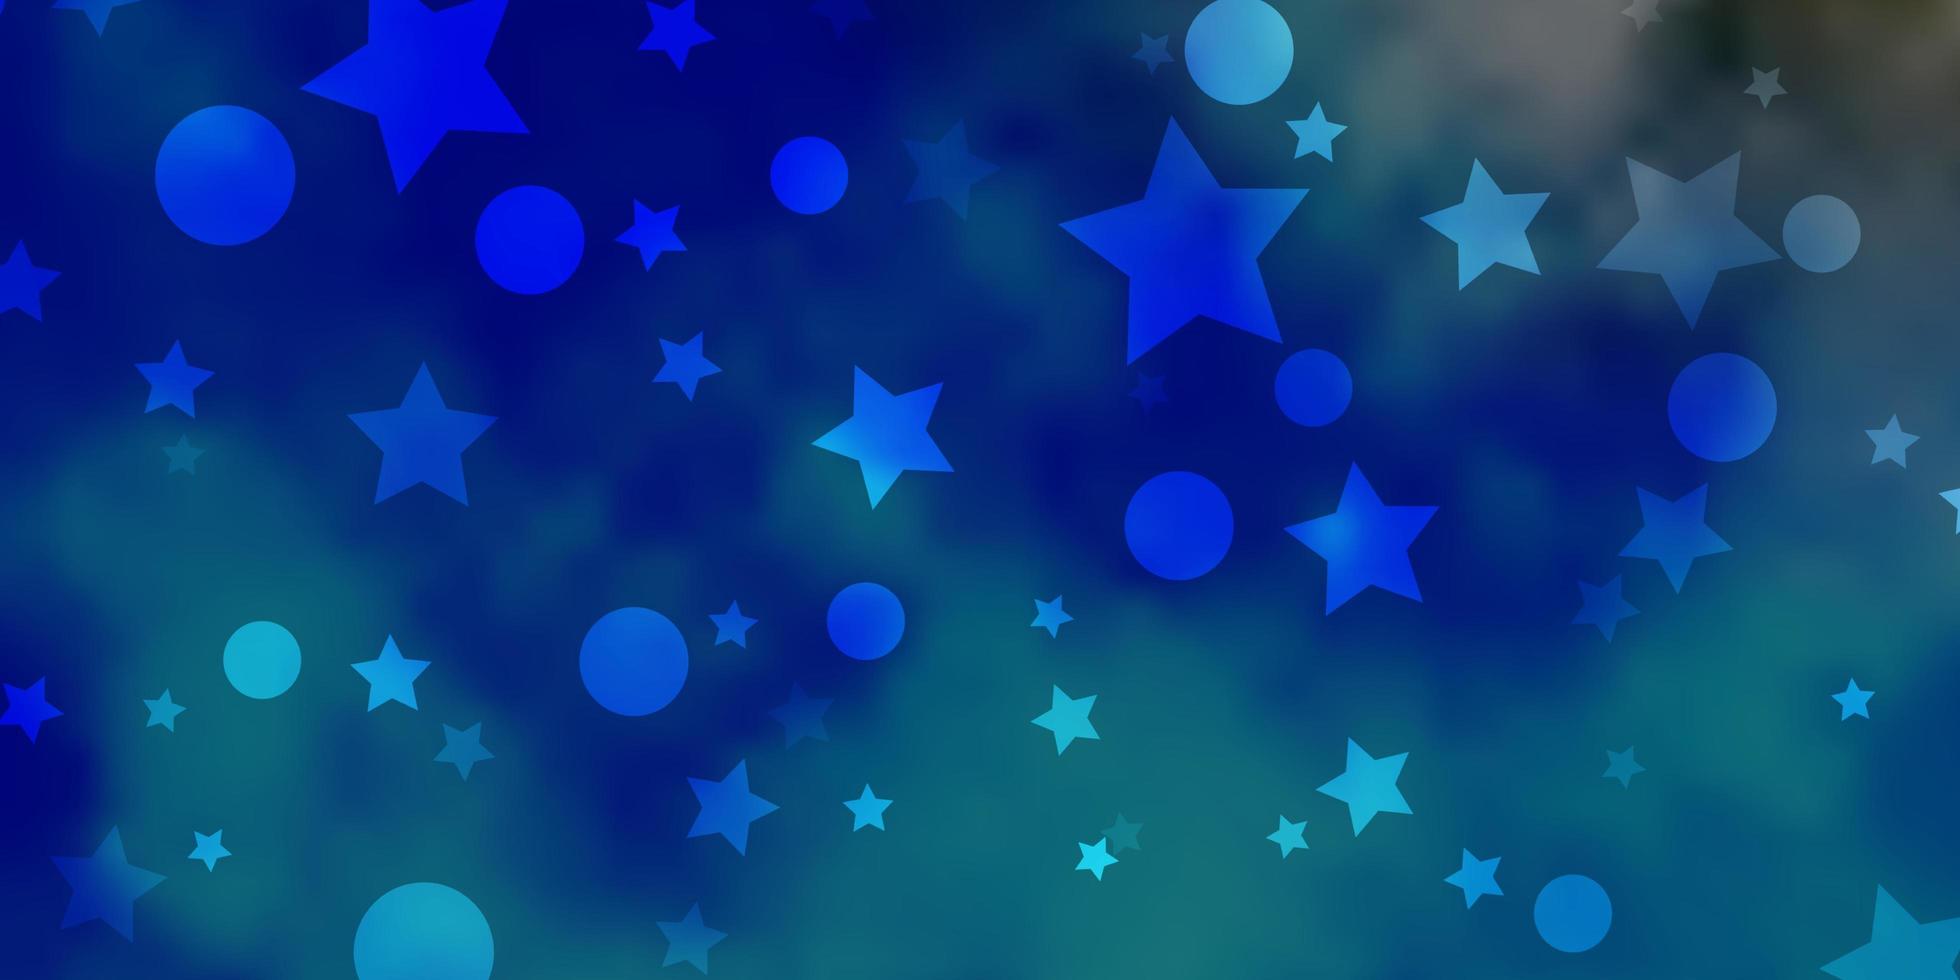 Light BLUE vector template with circles, stars. Illustration with set of colorful abstract spheres, stars. Design for wallpaper, fabric makers.